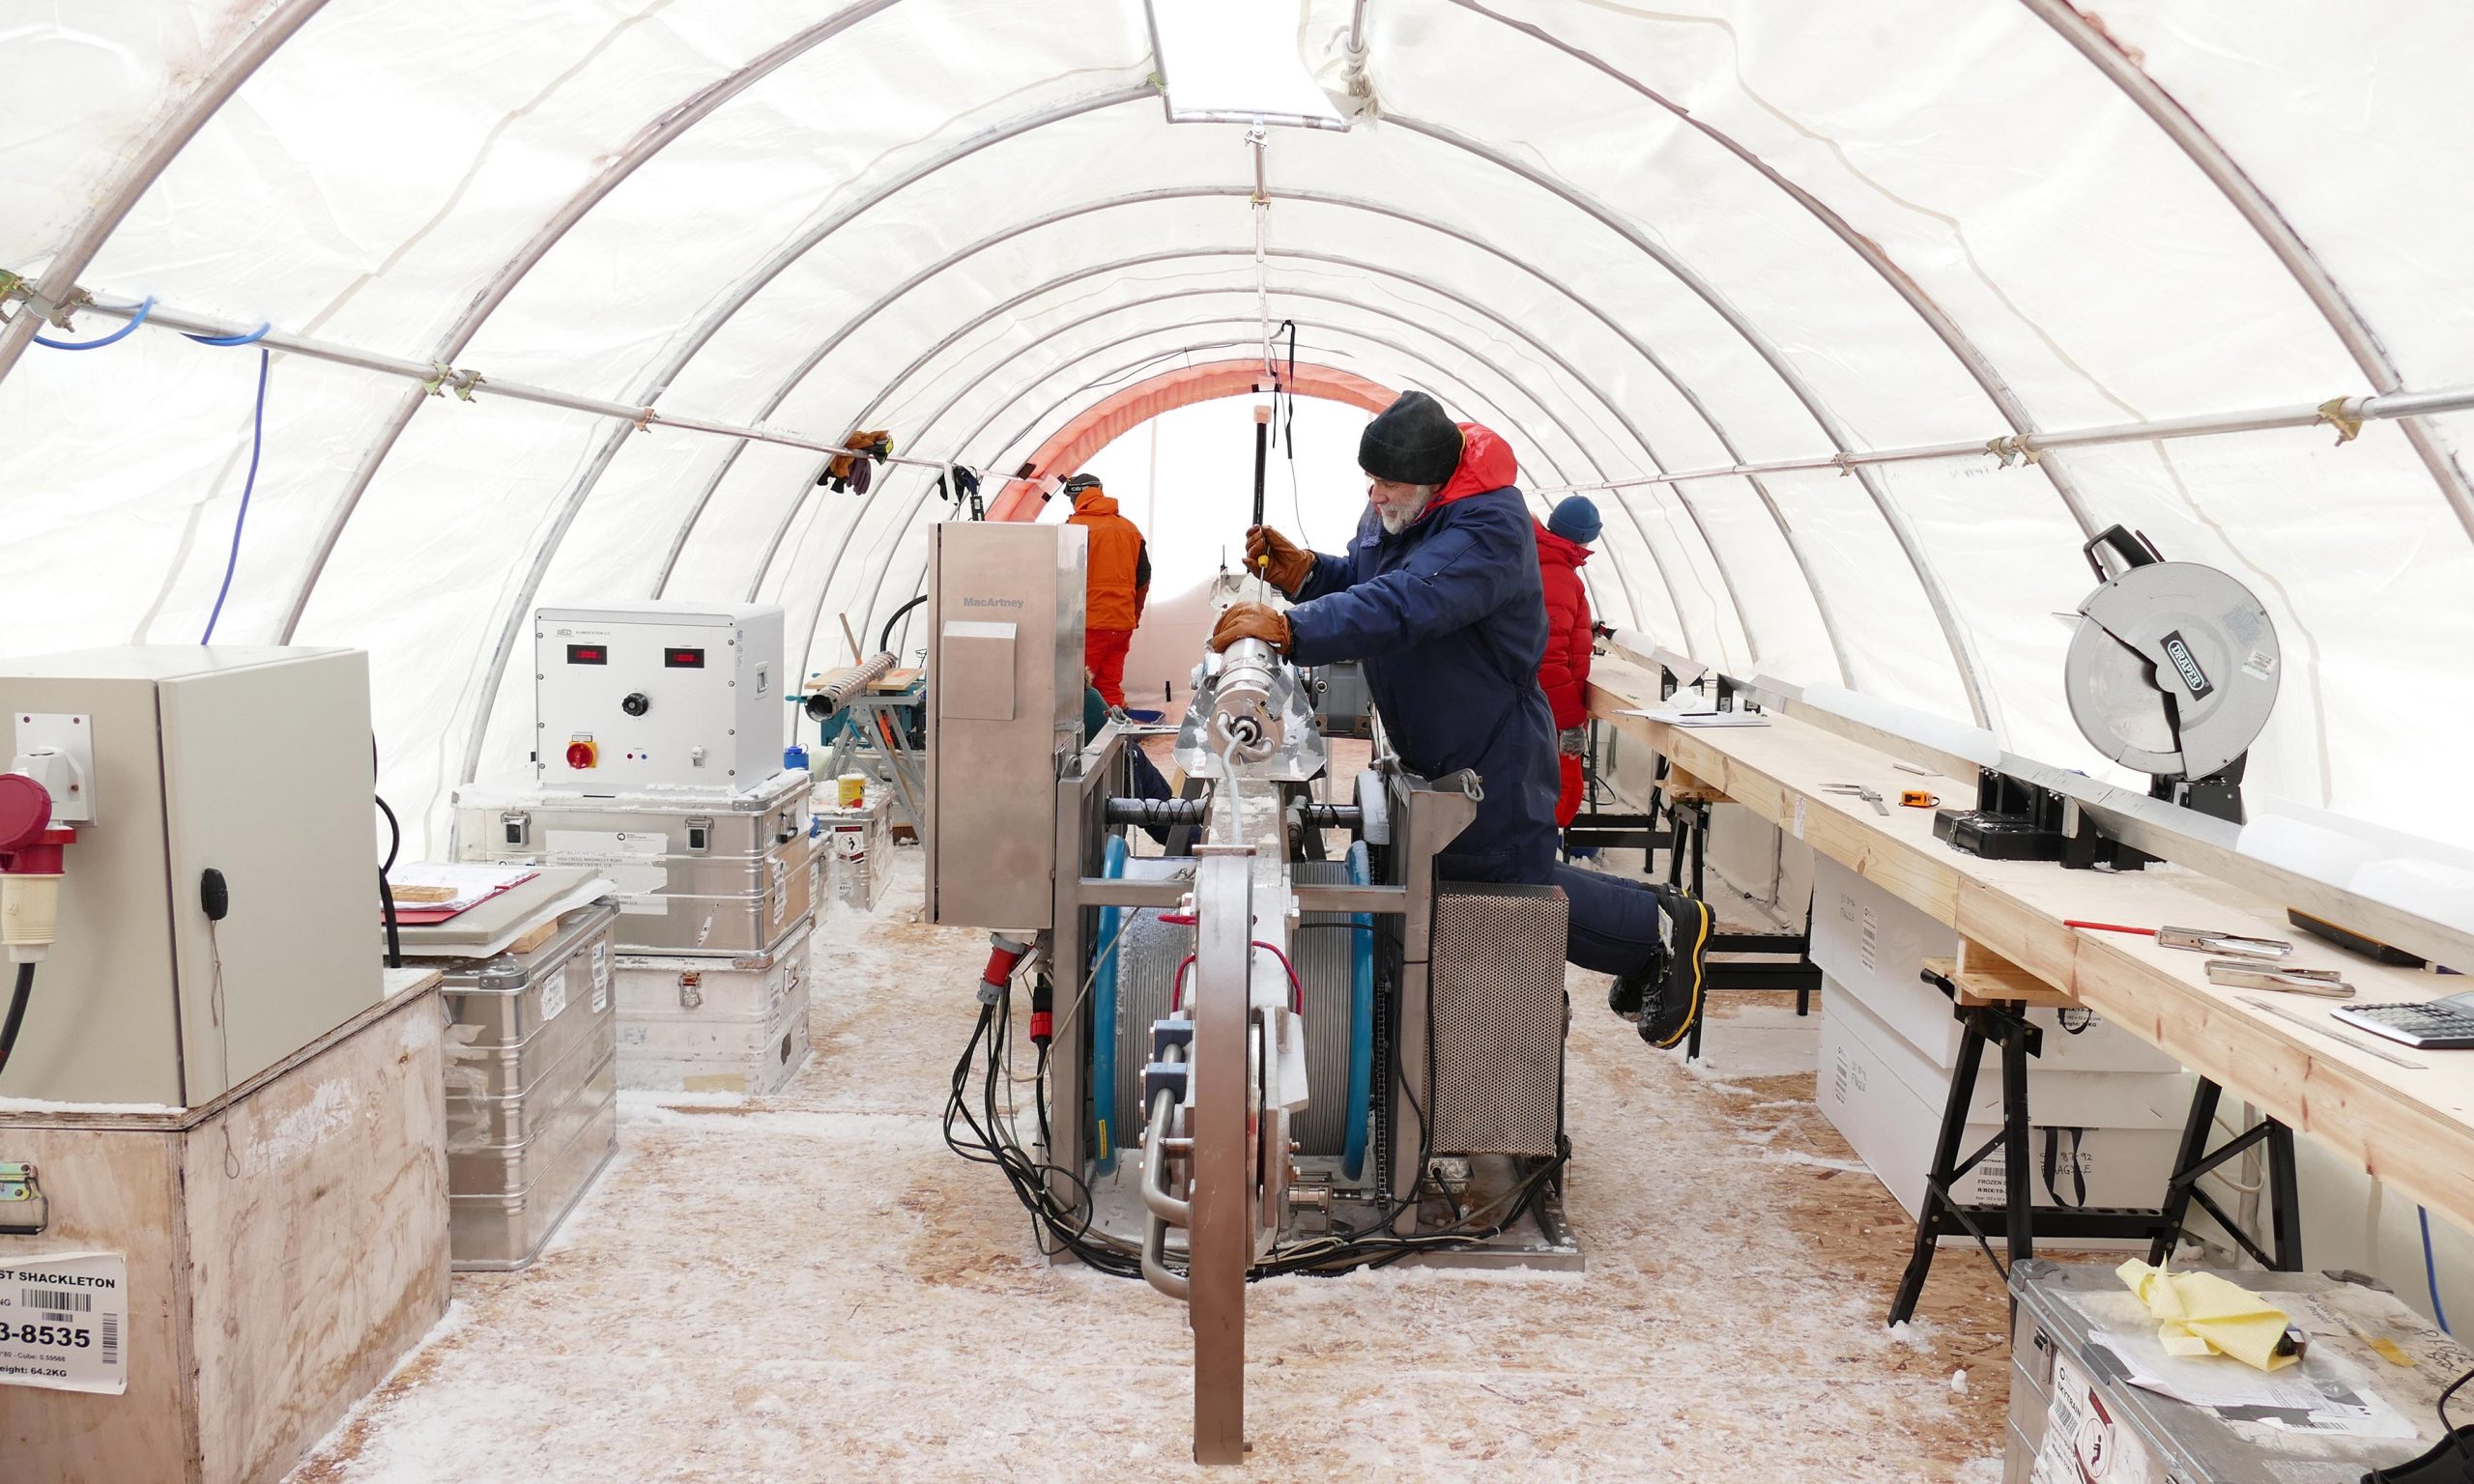 Drilling-Tent-at-Skytrain-Ice-Rise-scaled.jpg